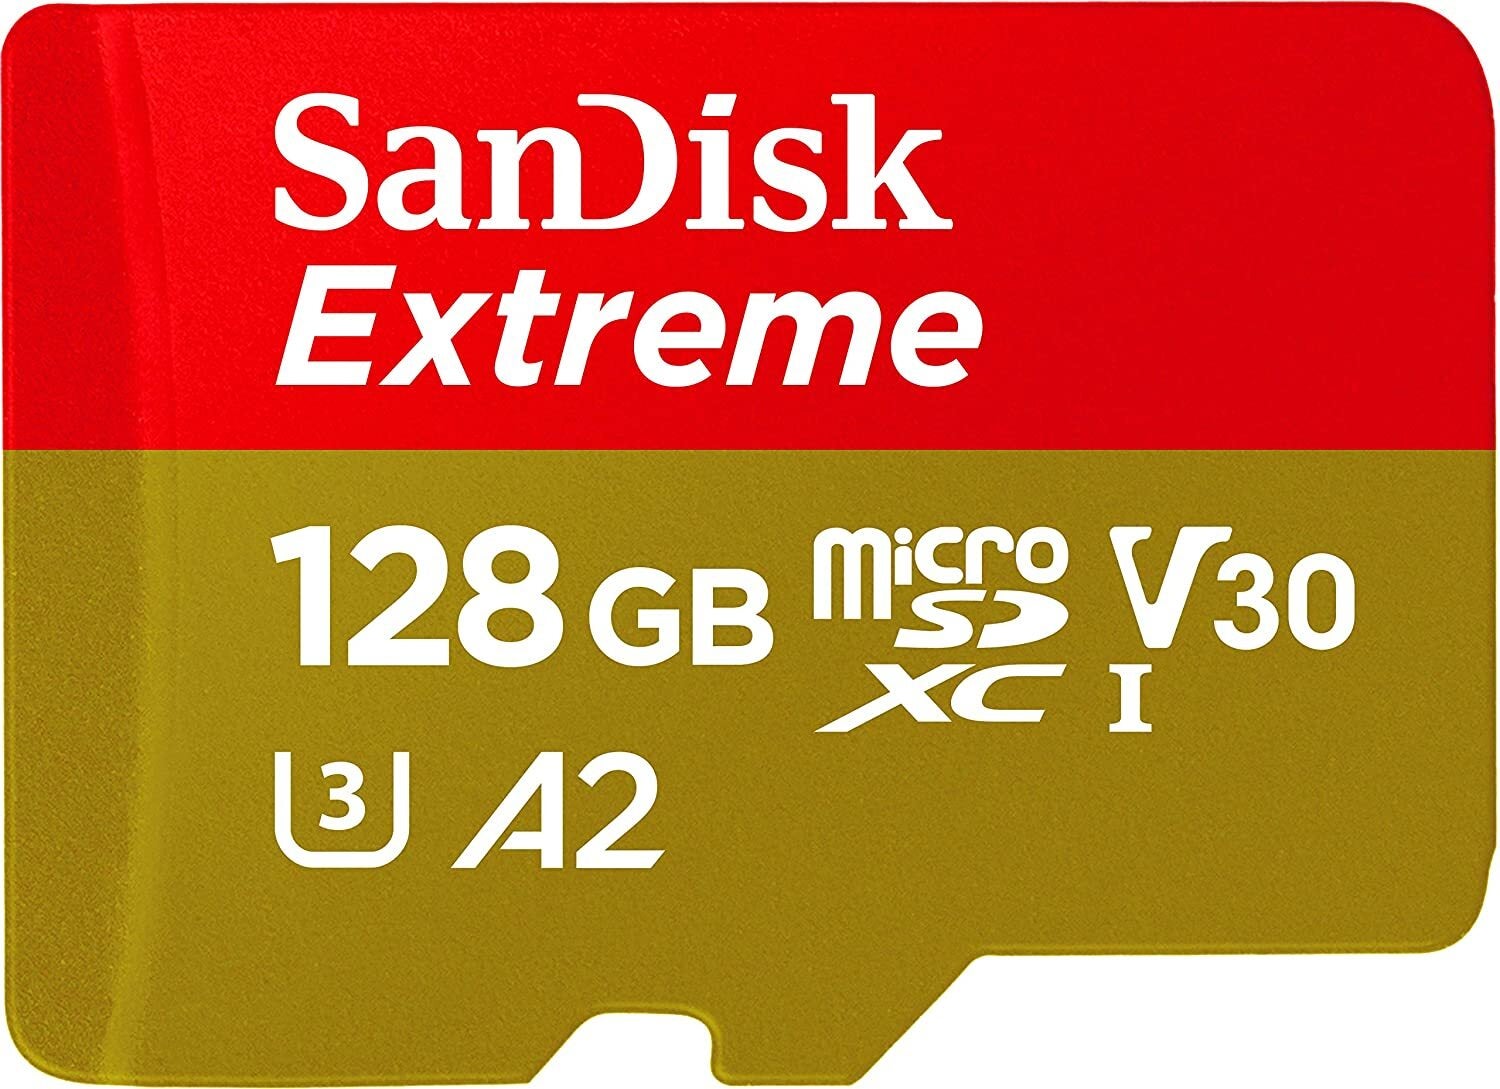 SanDisk Extreme 128GB Micro SD Card